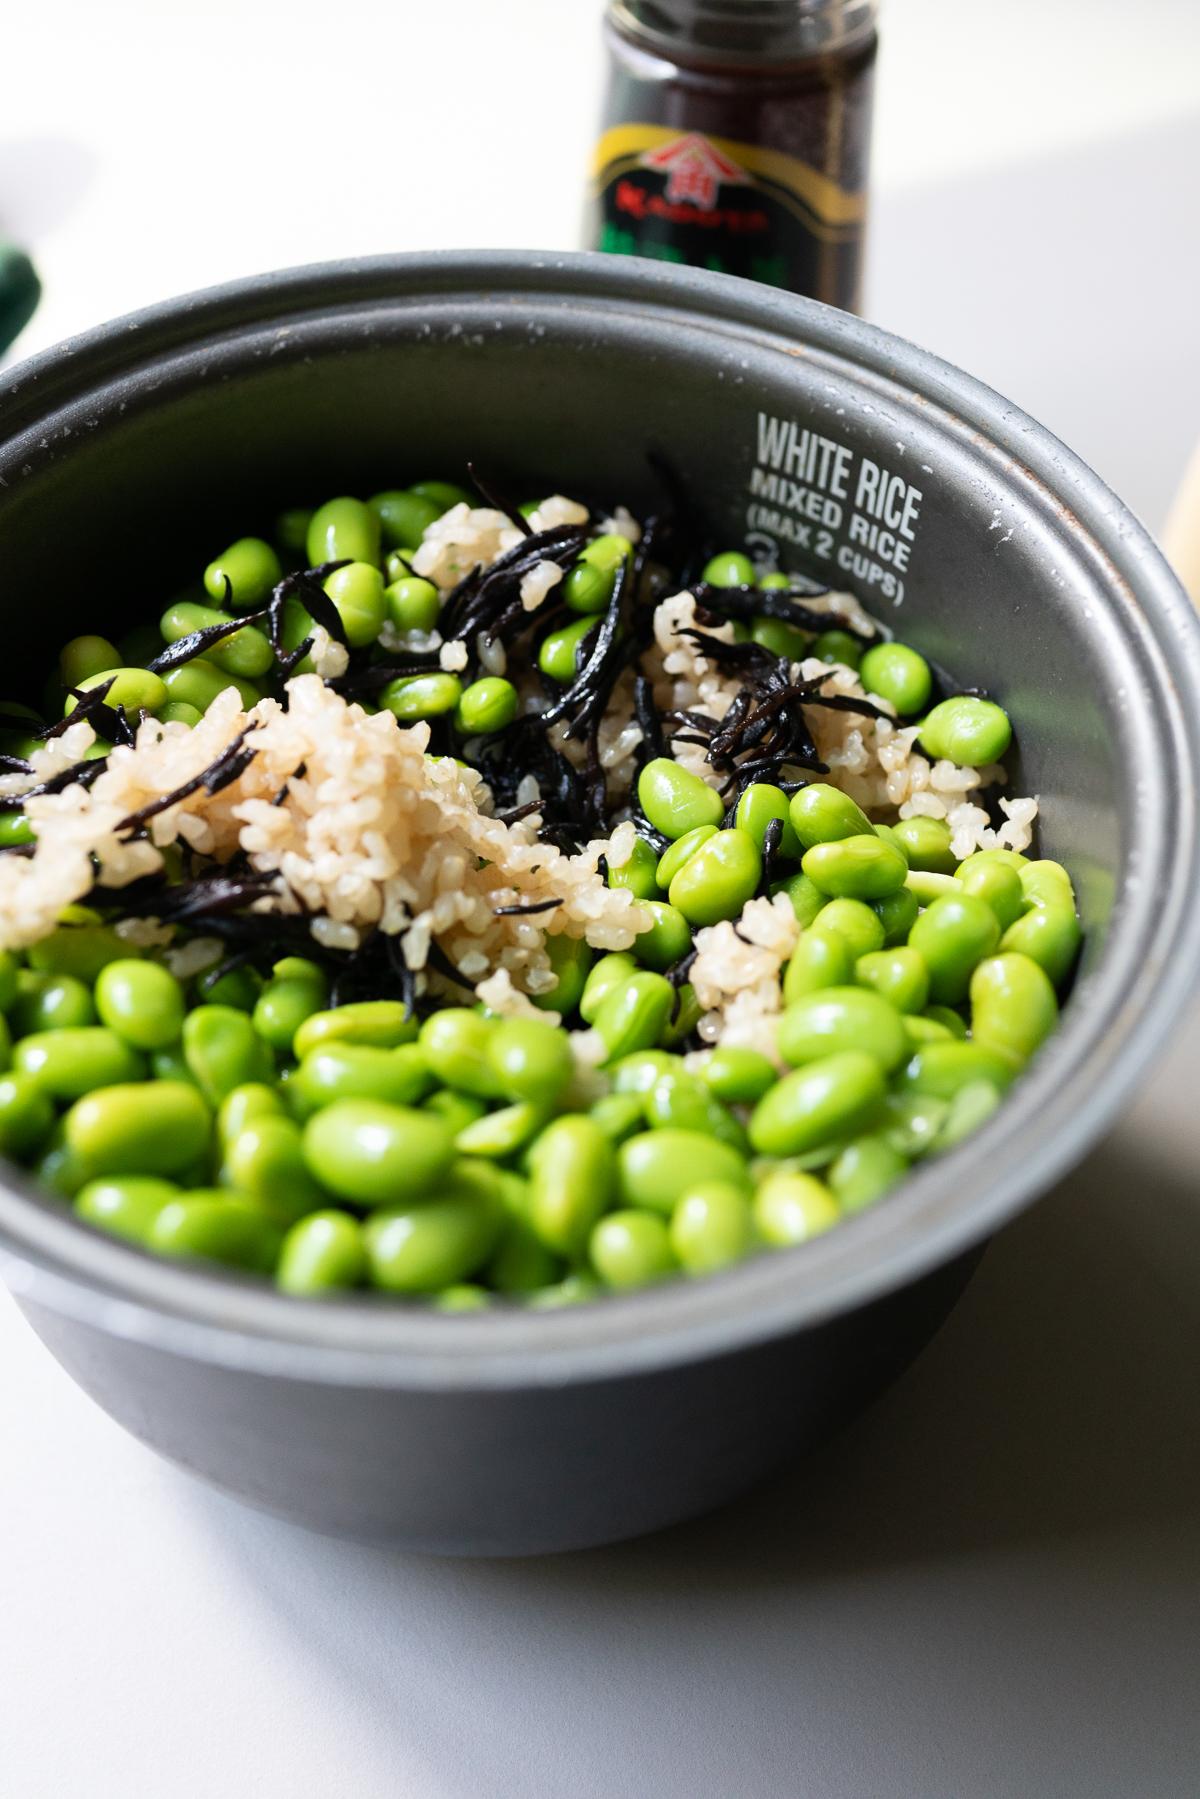 Mixing edamame into the cooked rice and hijiki